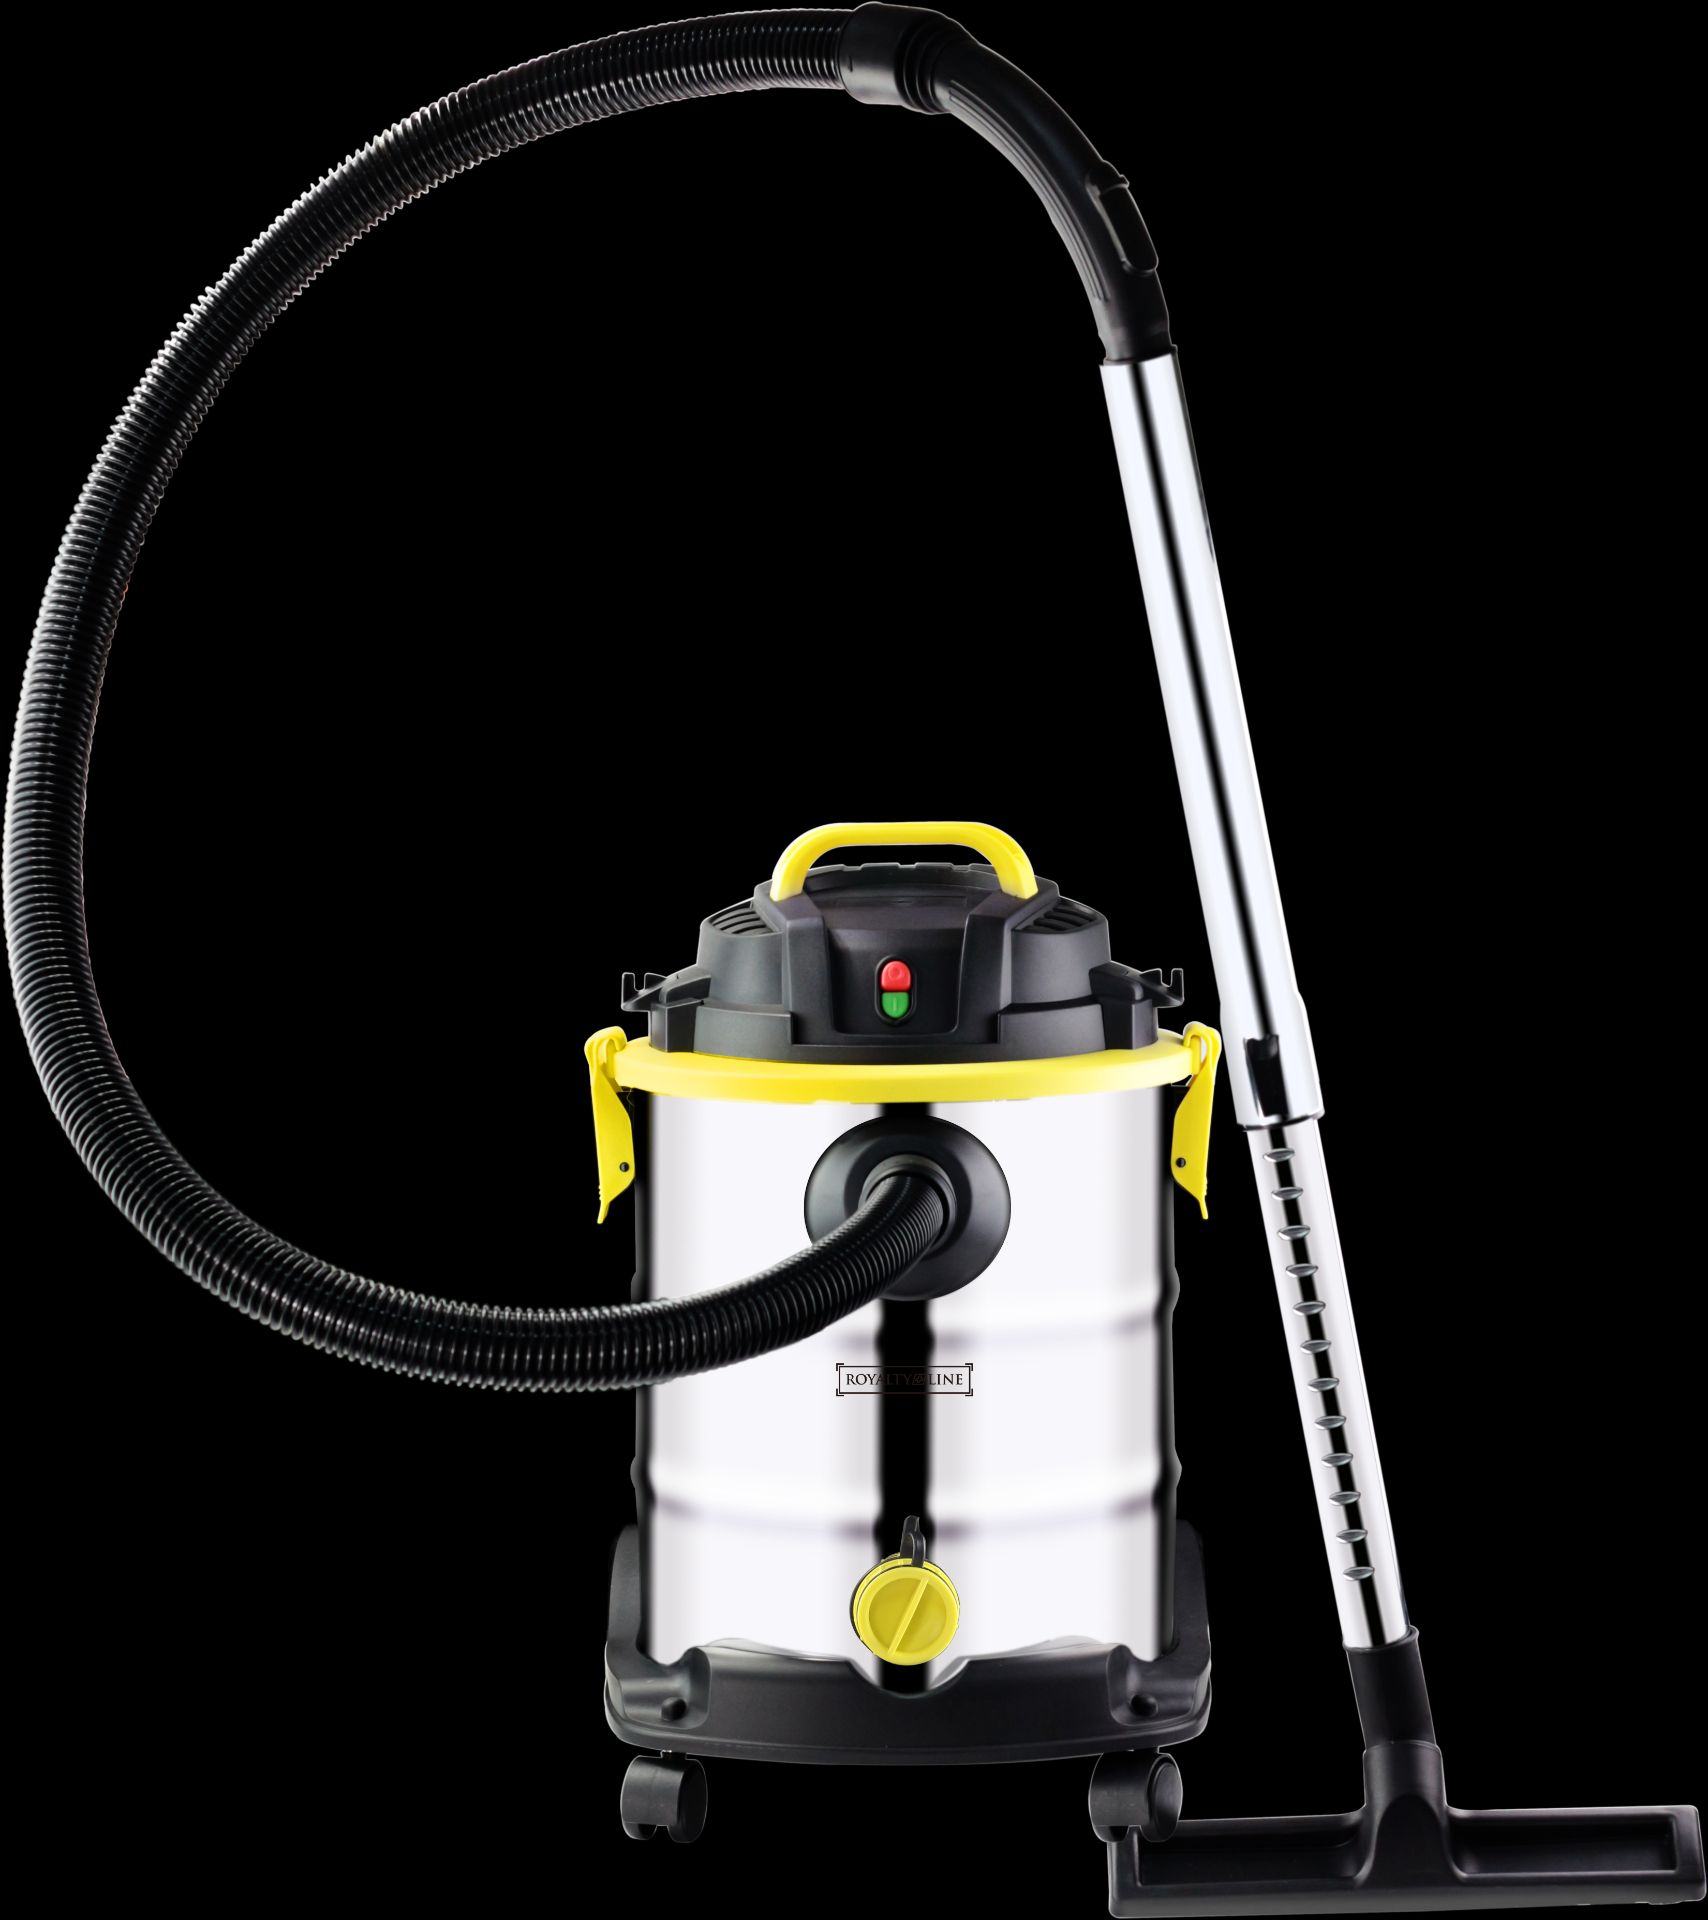 V Brand New Wet and Dry Vacuum Cleaner - 1400W - 25L Capacity - Multi Filtration System With Special